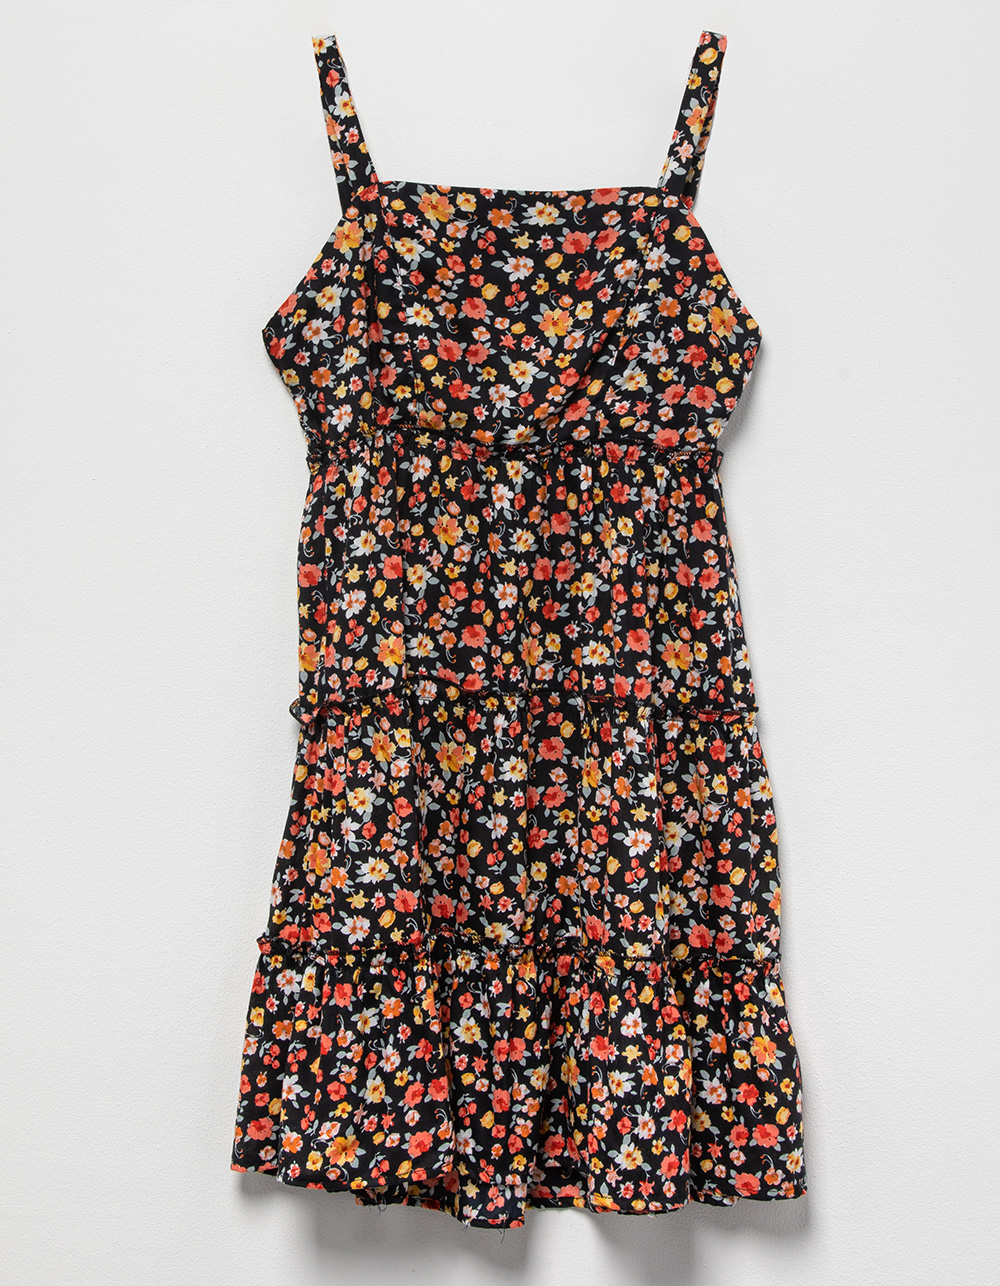 FULL CIRCLE TRENDS Floral Tiered Girls Babydoll Dress - NAVY COMBO | Tillys